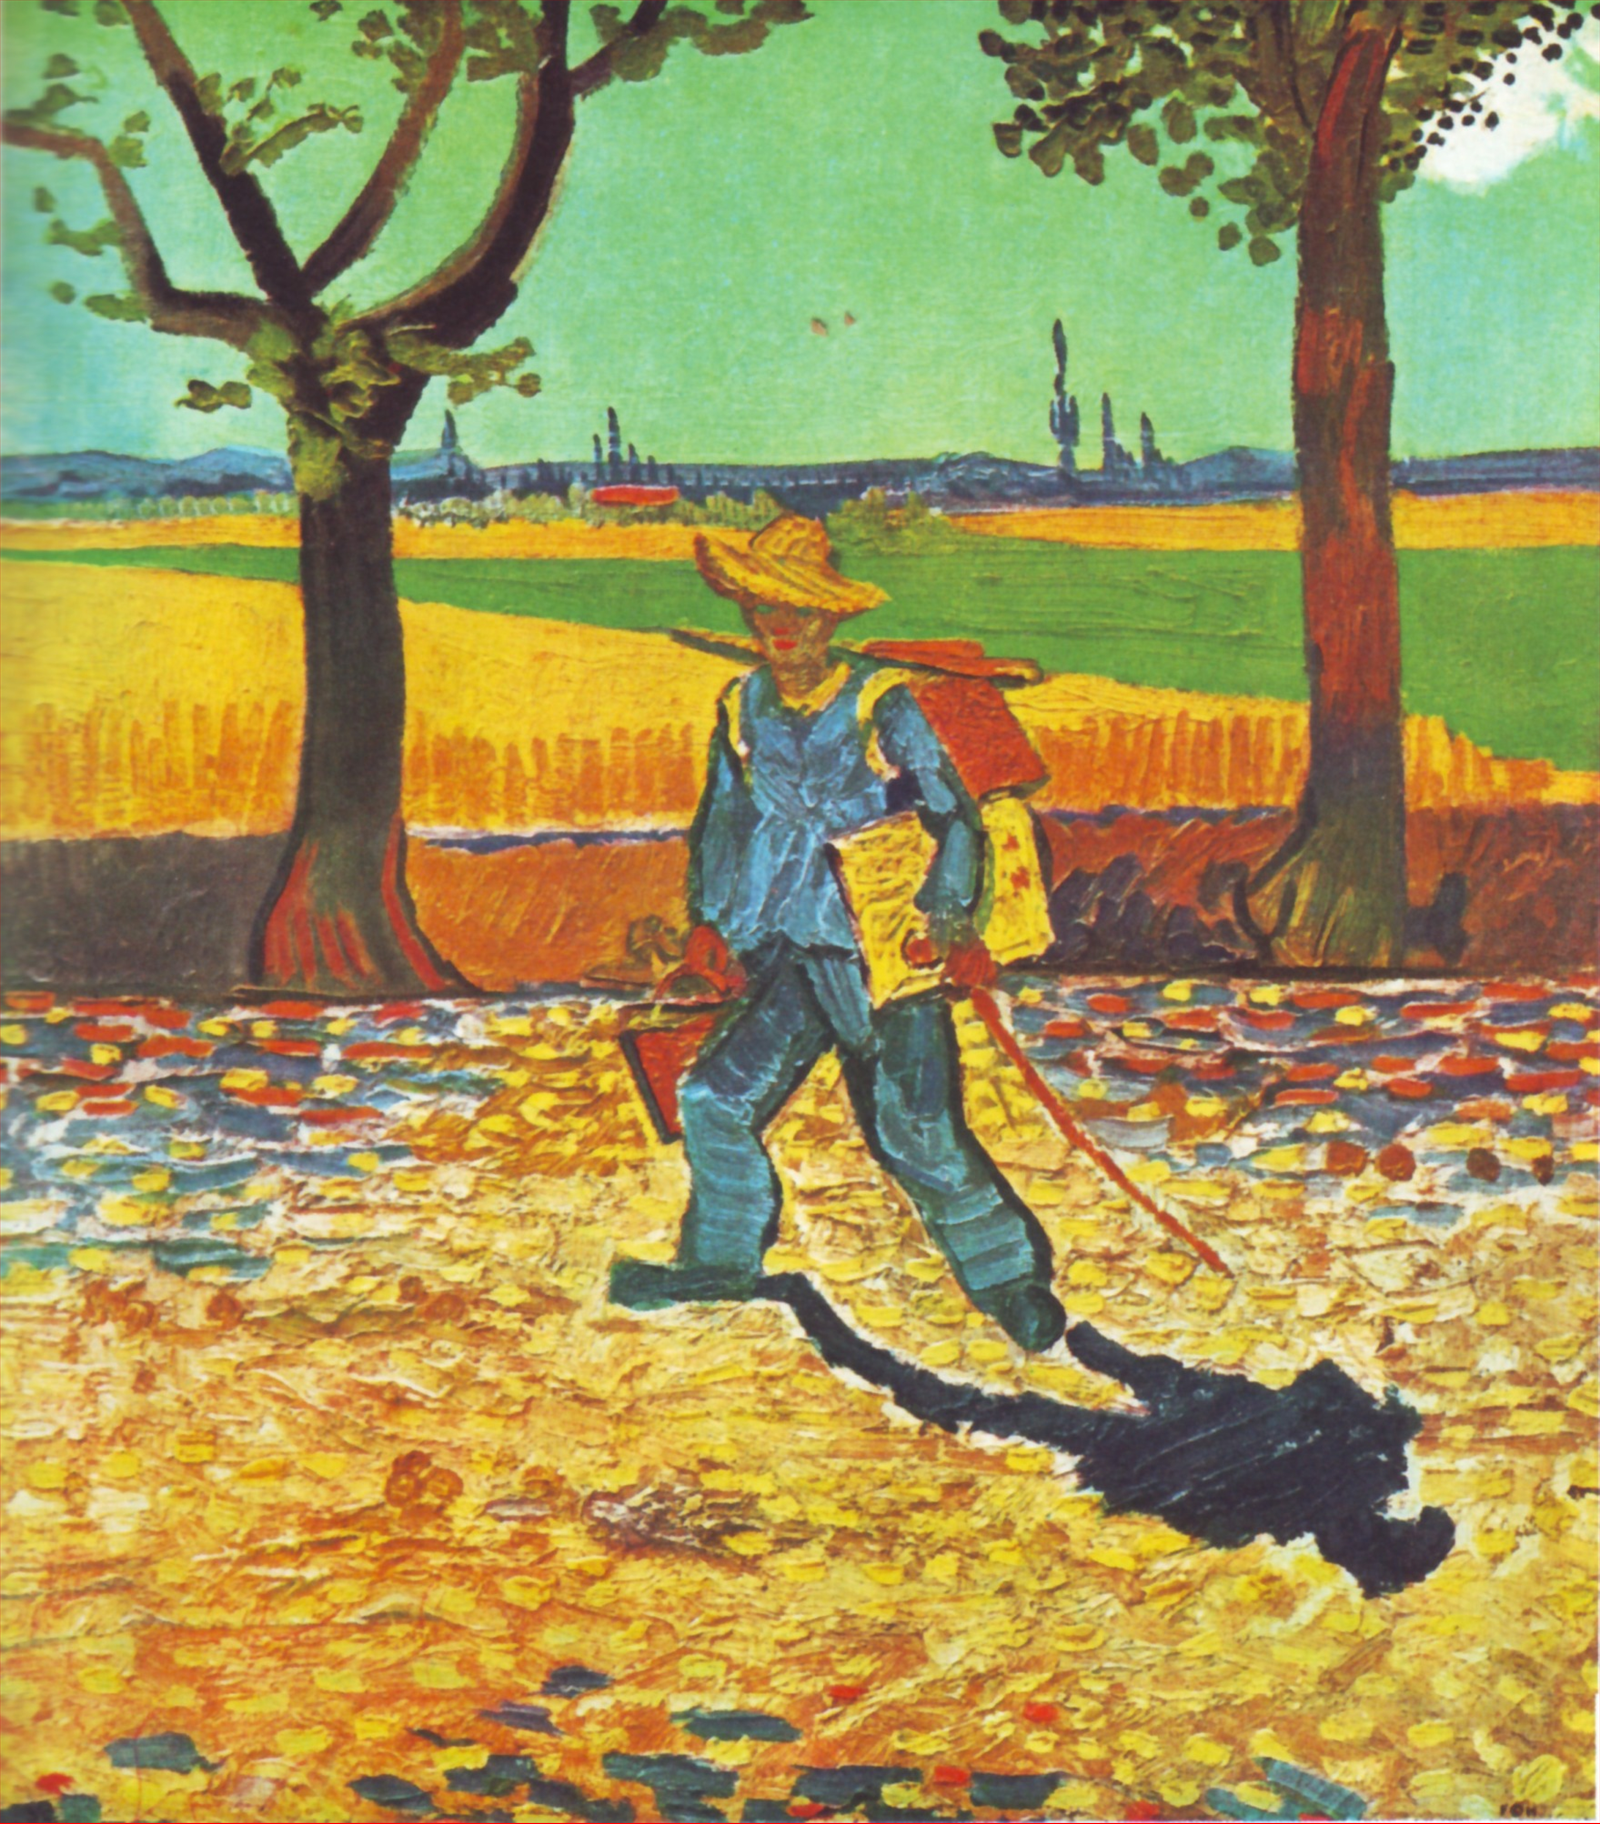 Painter on His Way to Work by Vincent van Gogh - 1888 - - destroyed